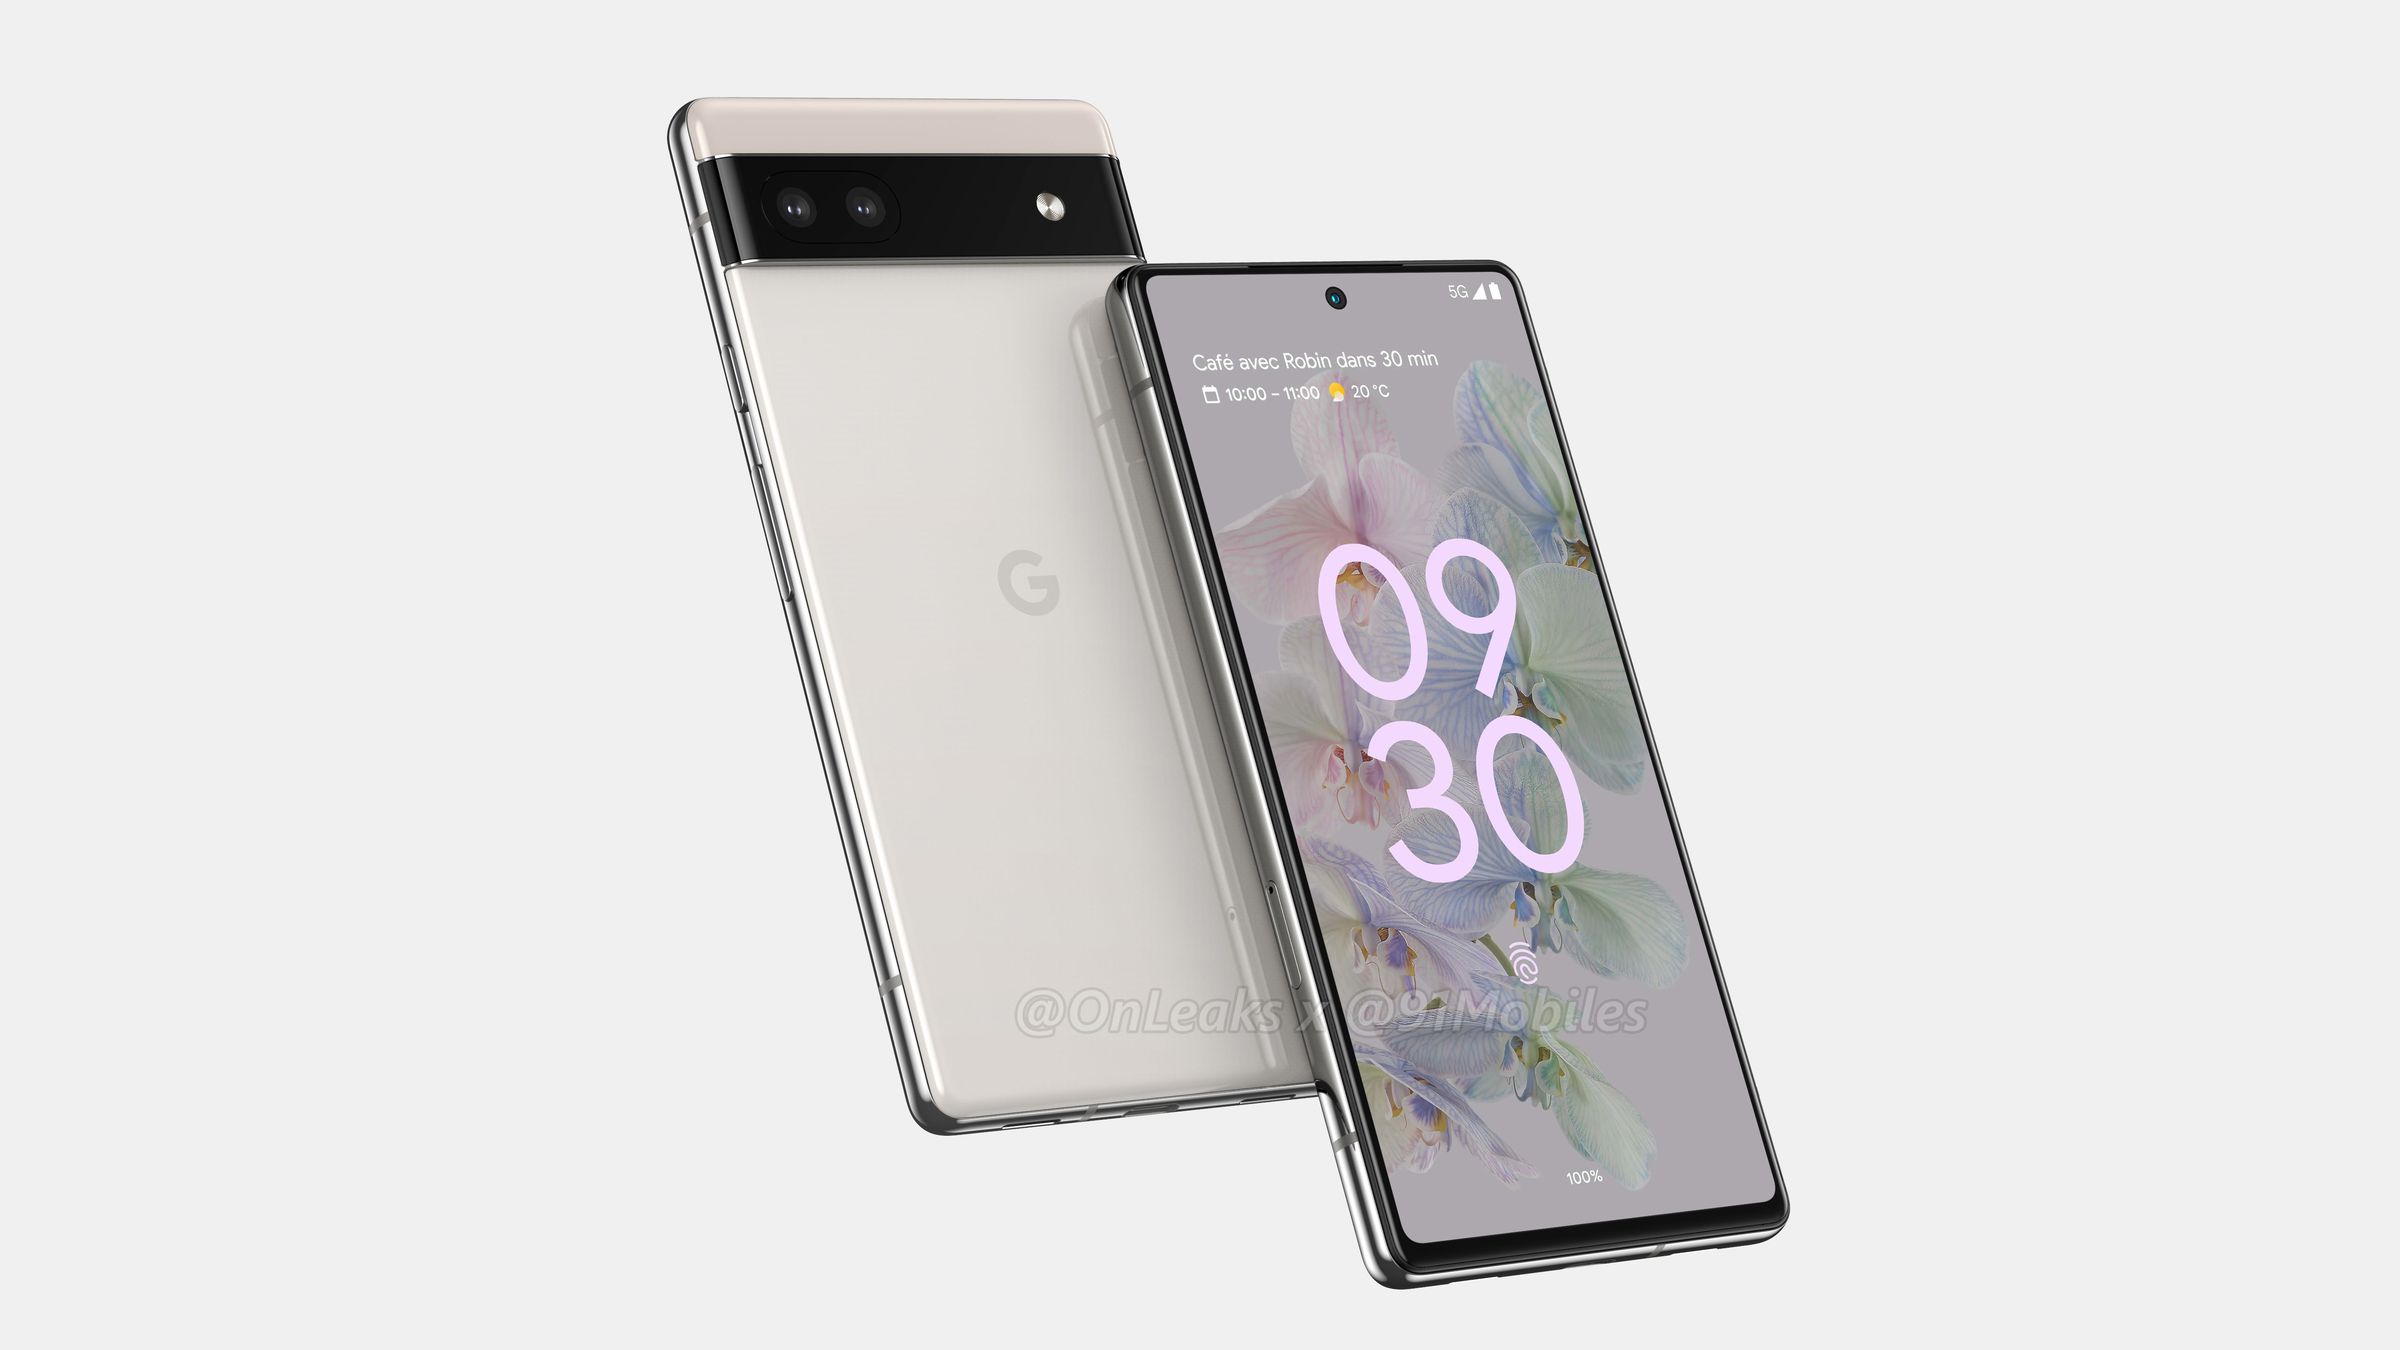 Unofficial renders of the Pixel 6A’s expected design.